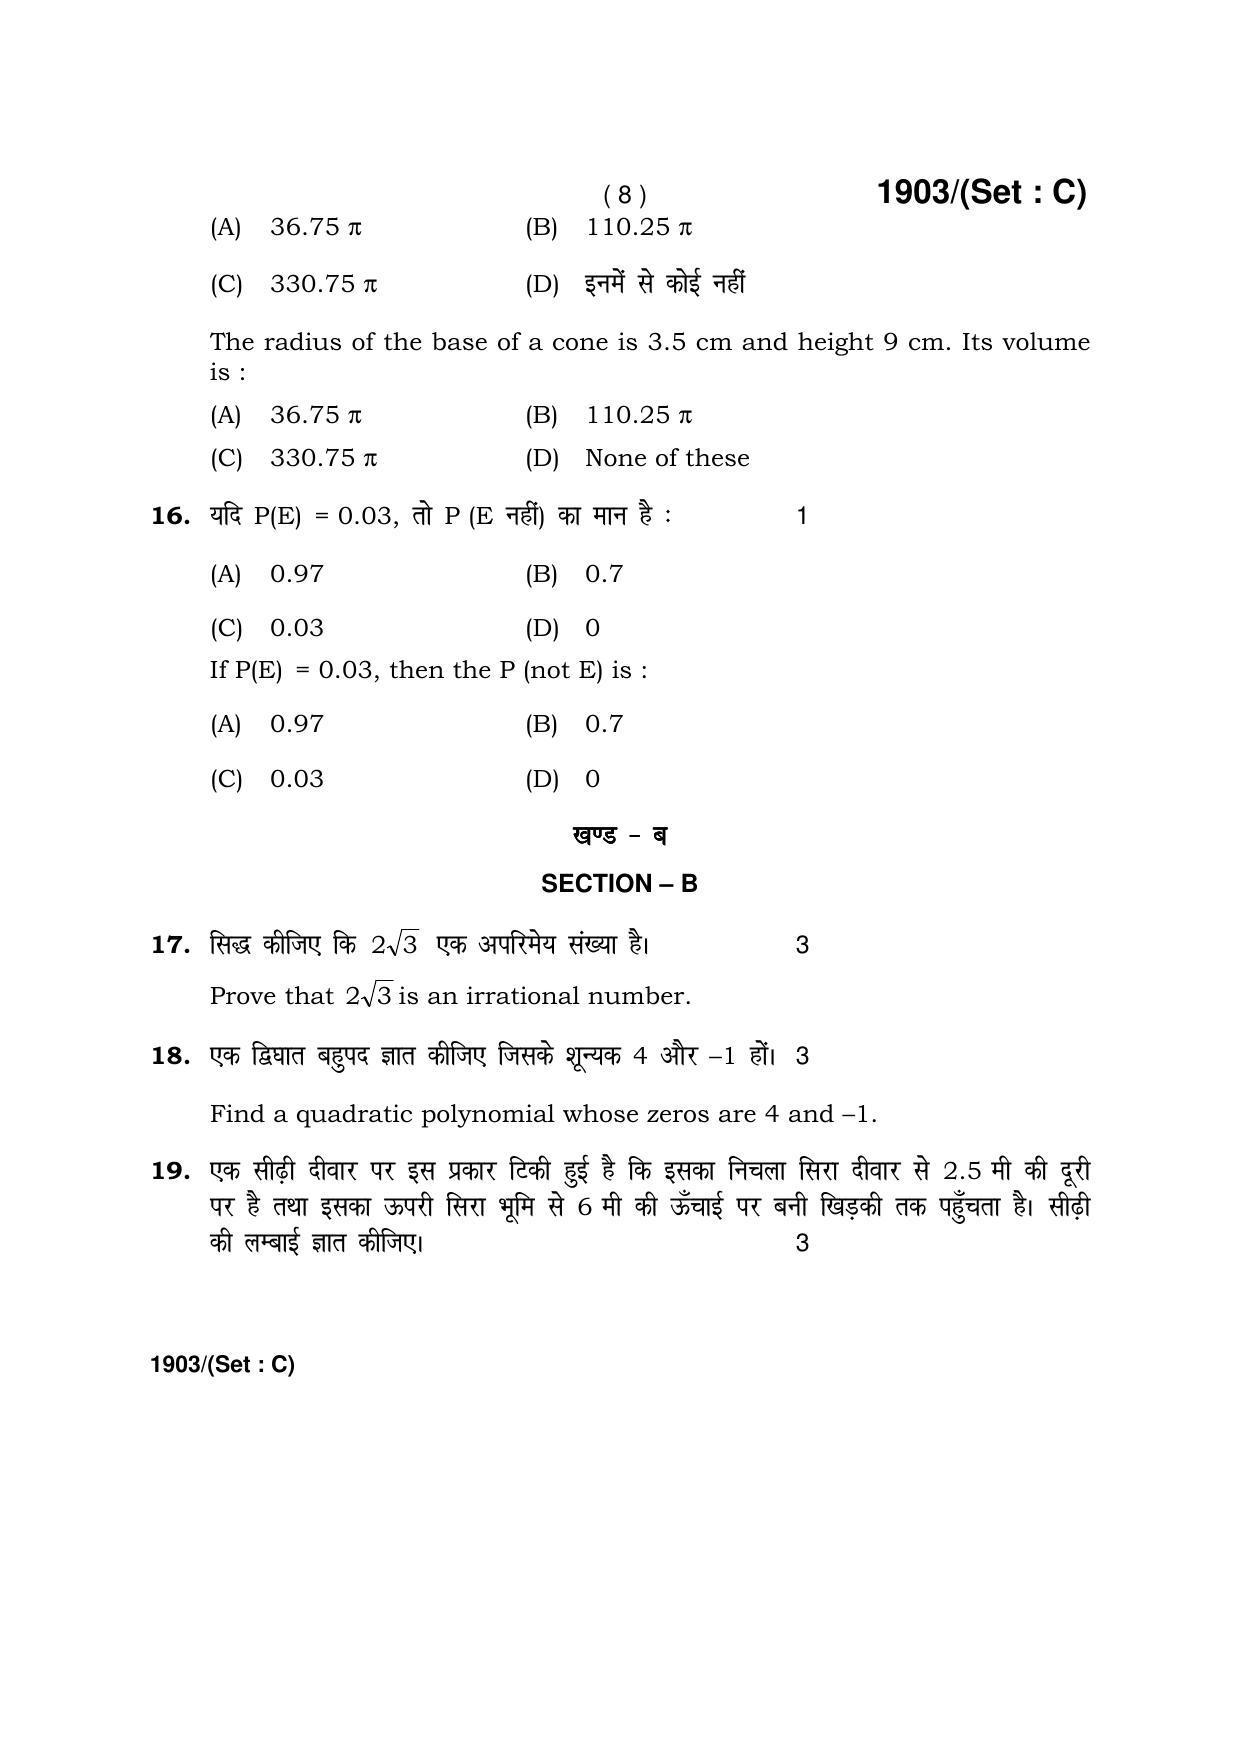 Haryana Board HBSE Class 10 Mathematics -C 2017 Question Paper - Page 8